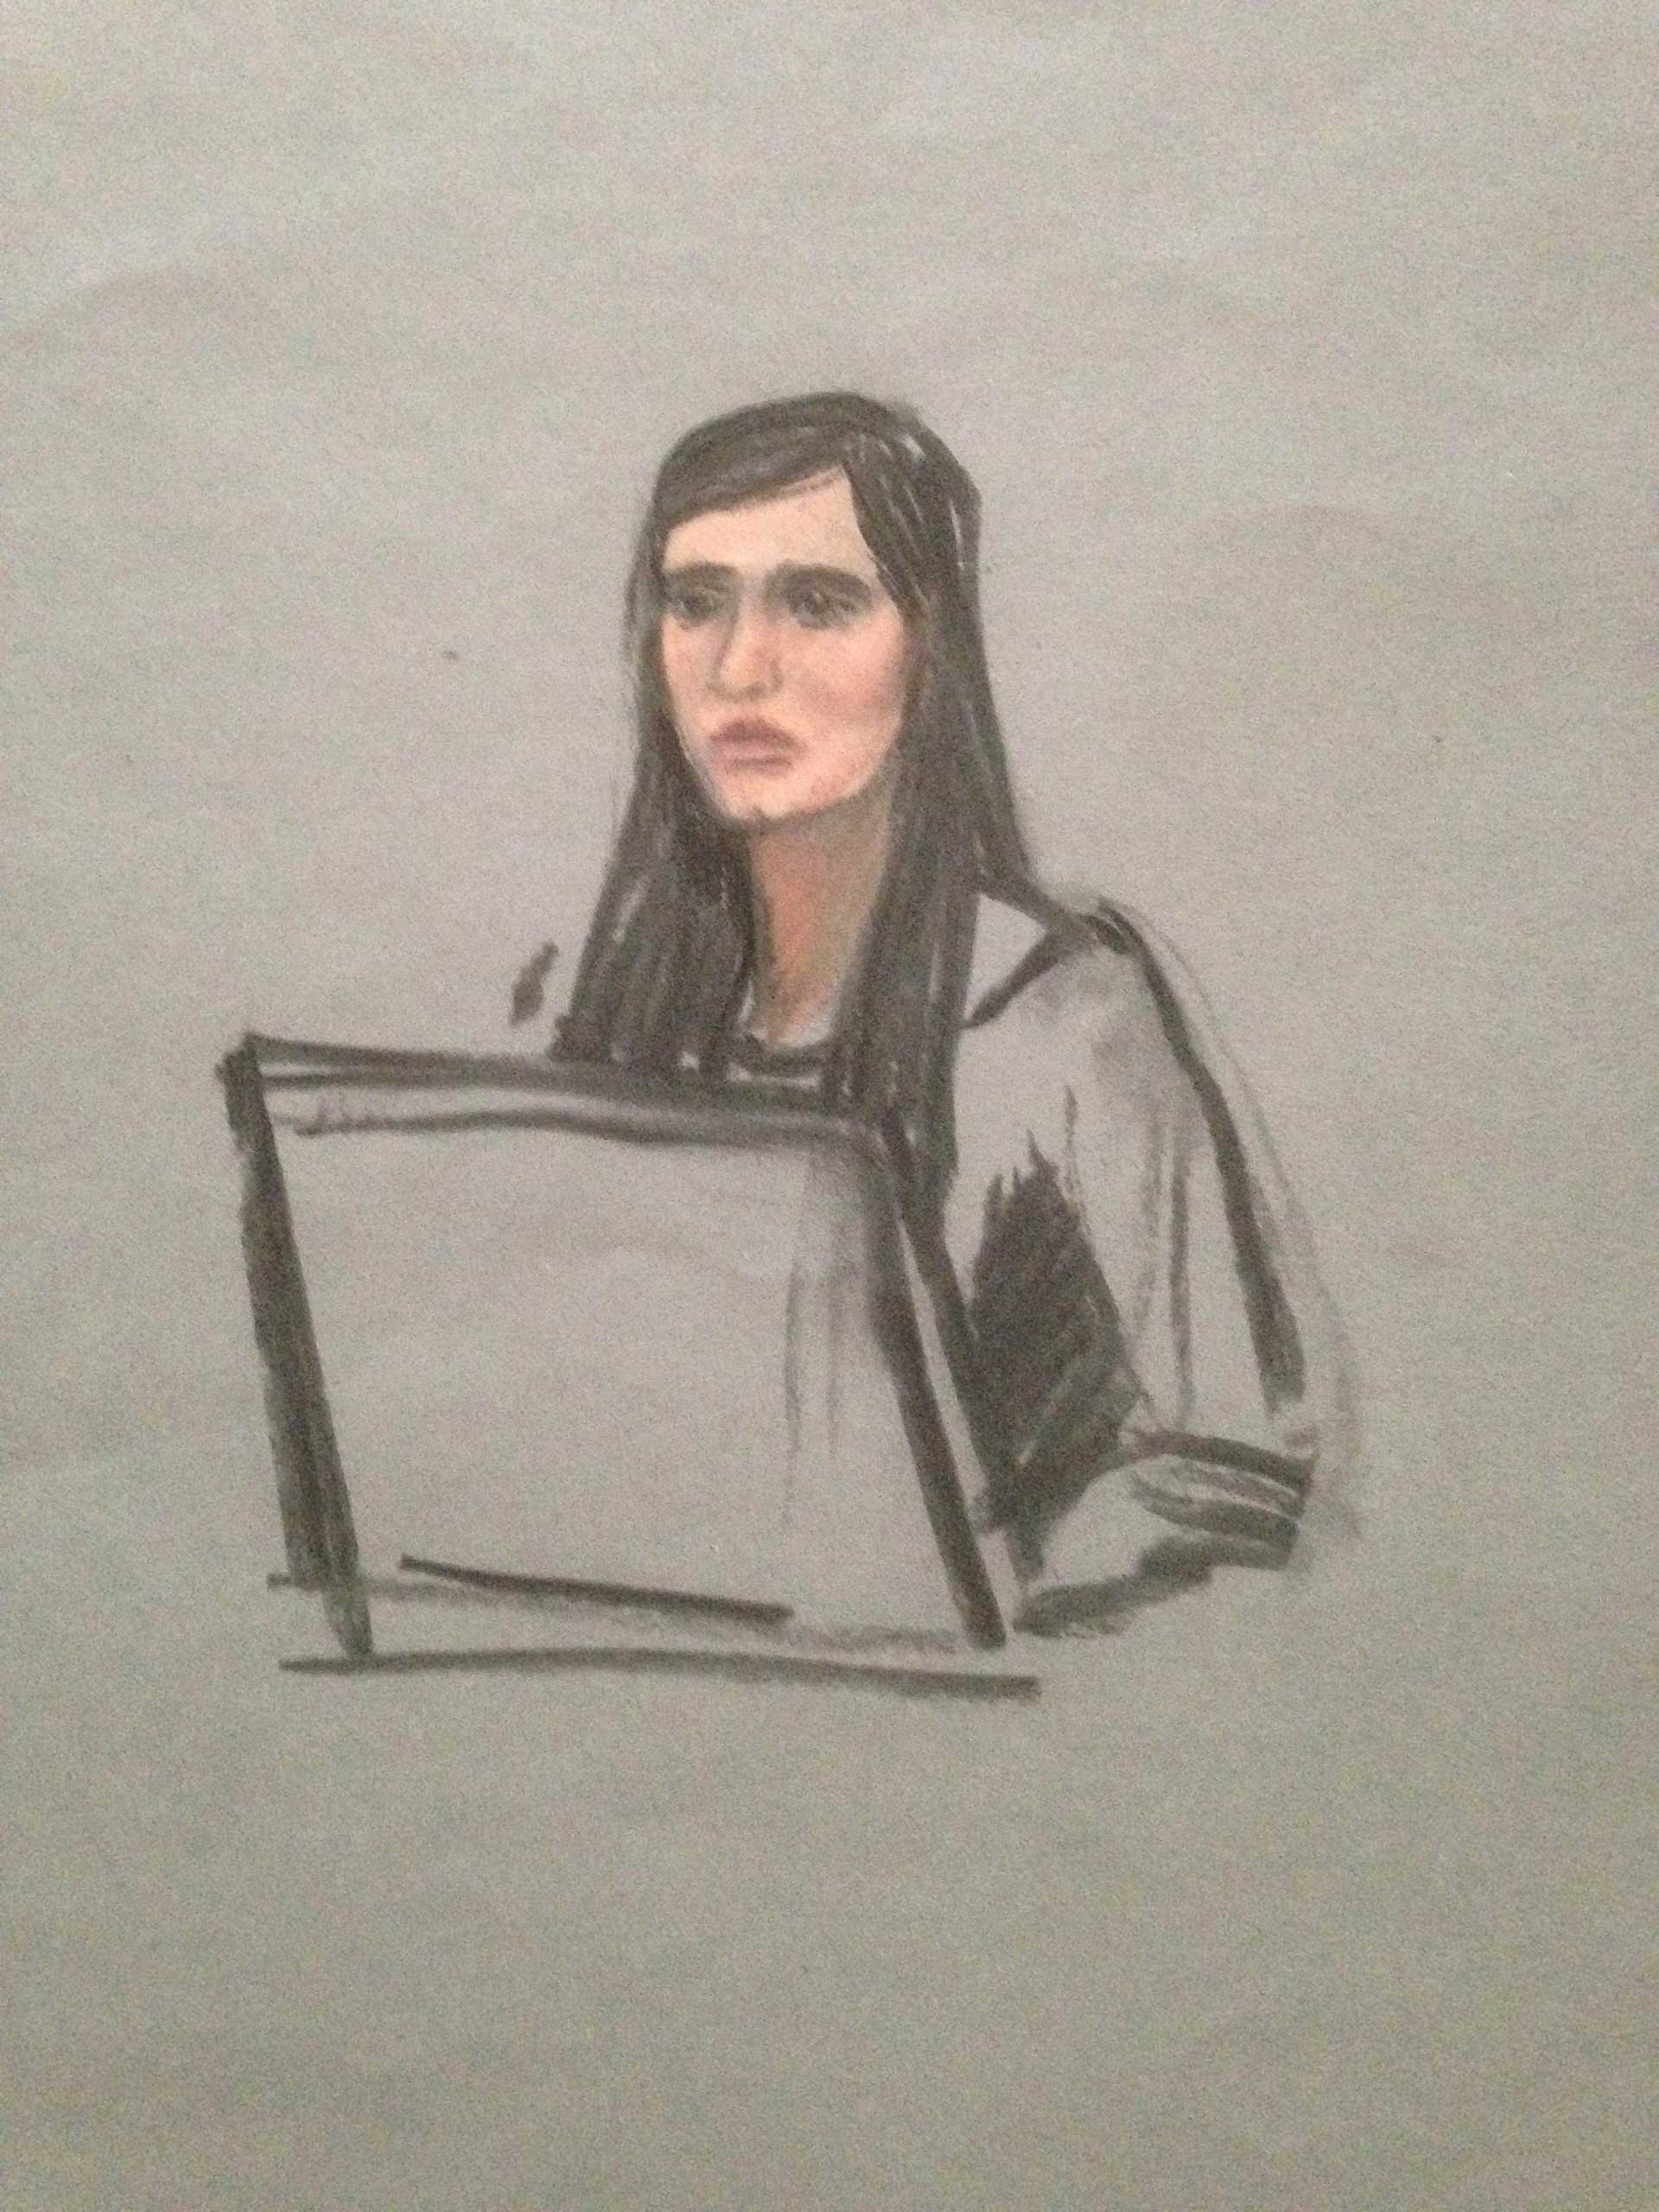 A courtroom sketch shows Boston Marathon bombing survivor Sydney Corcoran testifying in the trial of accused bomber Dzhokhar Tsarnaev at the federal courthouse in Boston